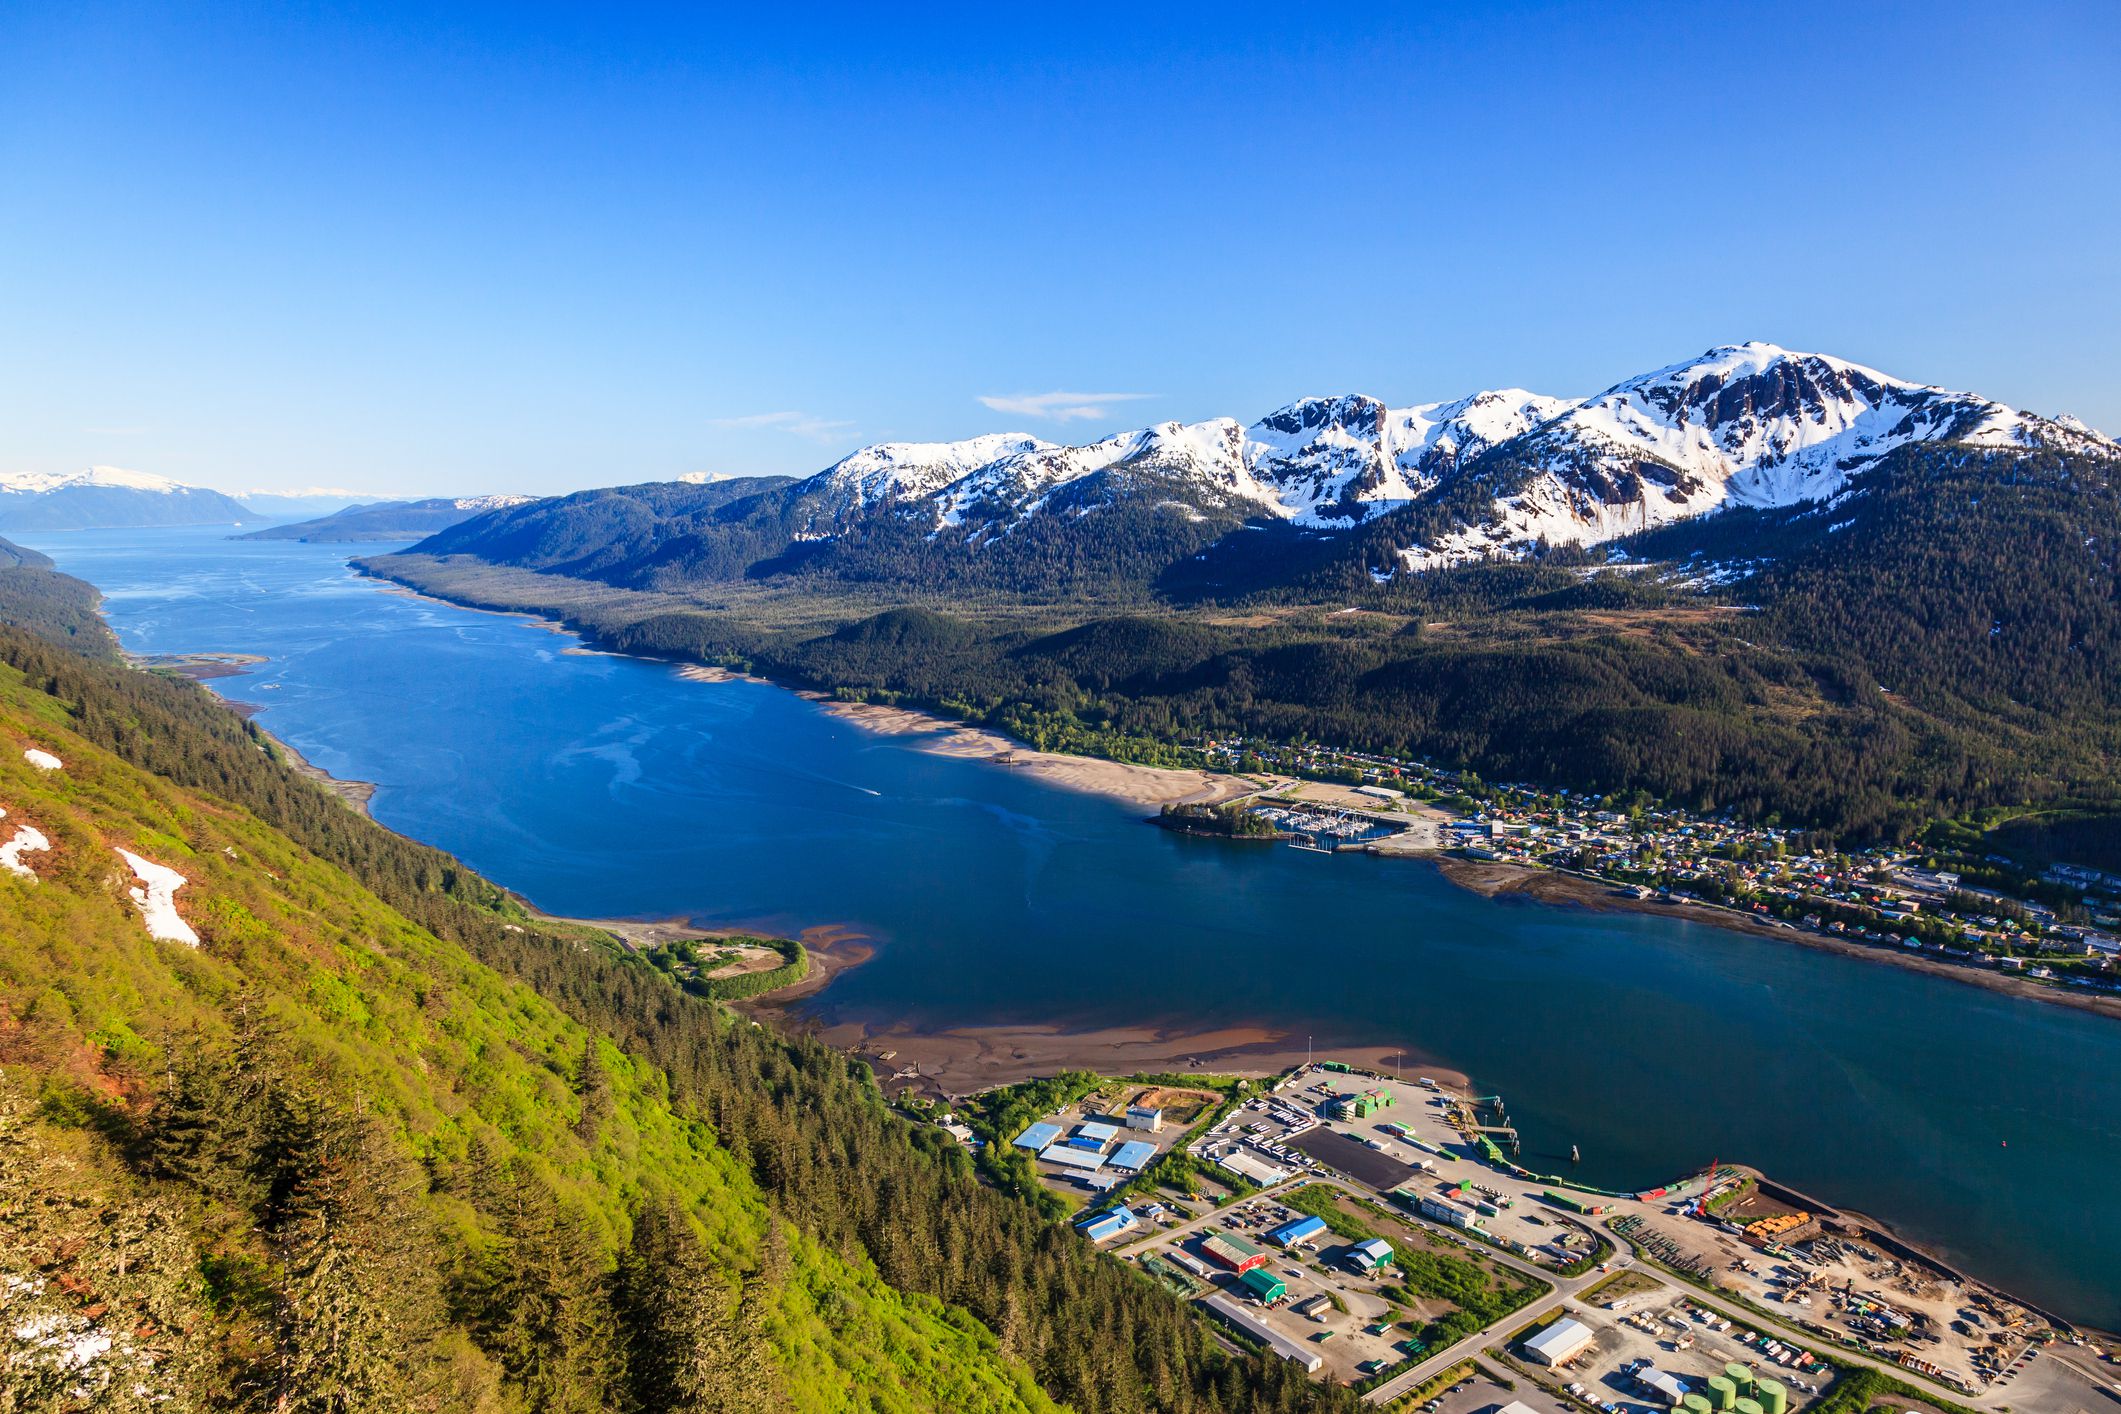 <p>Juneau’s population over 65 may be small (just under 14%), but that doesn’t mean the spot isn’t friendly to retirees. If you want to live a more active lifestyle in retirement, the capital city of Alaska offers plenty to do, including wildlife watching and symphony orchestras.</p><ul><li>Population: 31,685</li><li>Median Household Income: $90,126</li><li>Cost of Living: 114.2% of U.S. average</li><li>Median Rent Price: $1,319</li><li>Home Price-to-Income Ratio: 3.97</li><li>Average Property Tax: 0.98%</li></ul><p class="padding-top-ms u-margin-bottom-ms"><b>Housing Affordability:</b> Housing in Juneau isn’t cheap. The median home price is more than $358,000, and median monthly rent surpasses $1,319.</p>